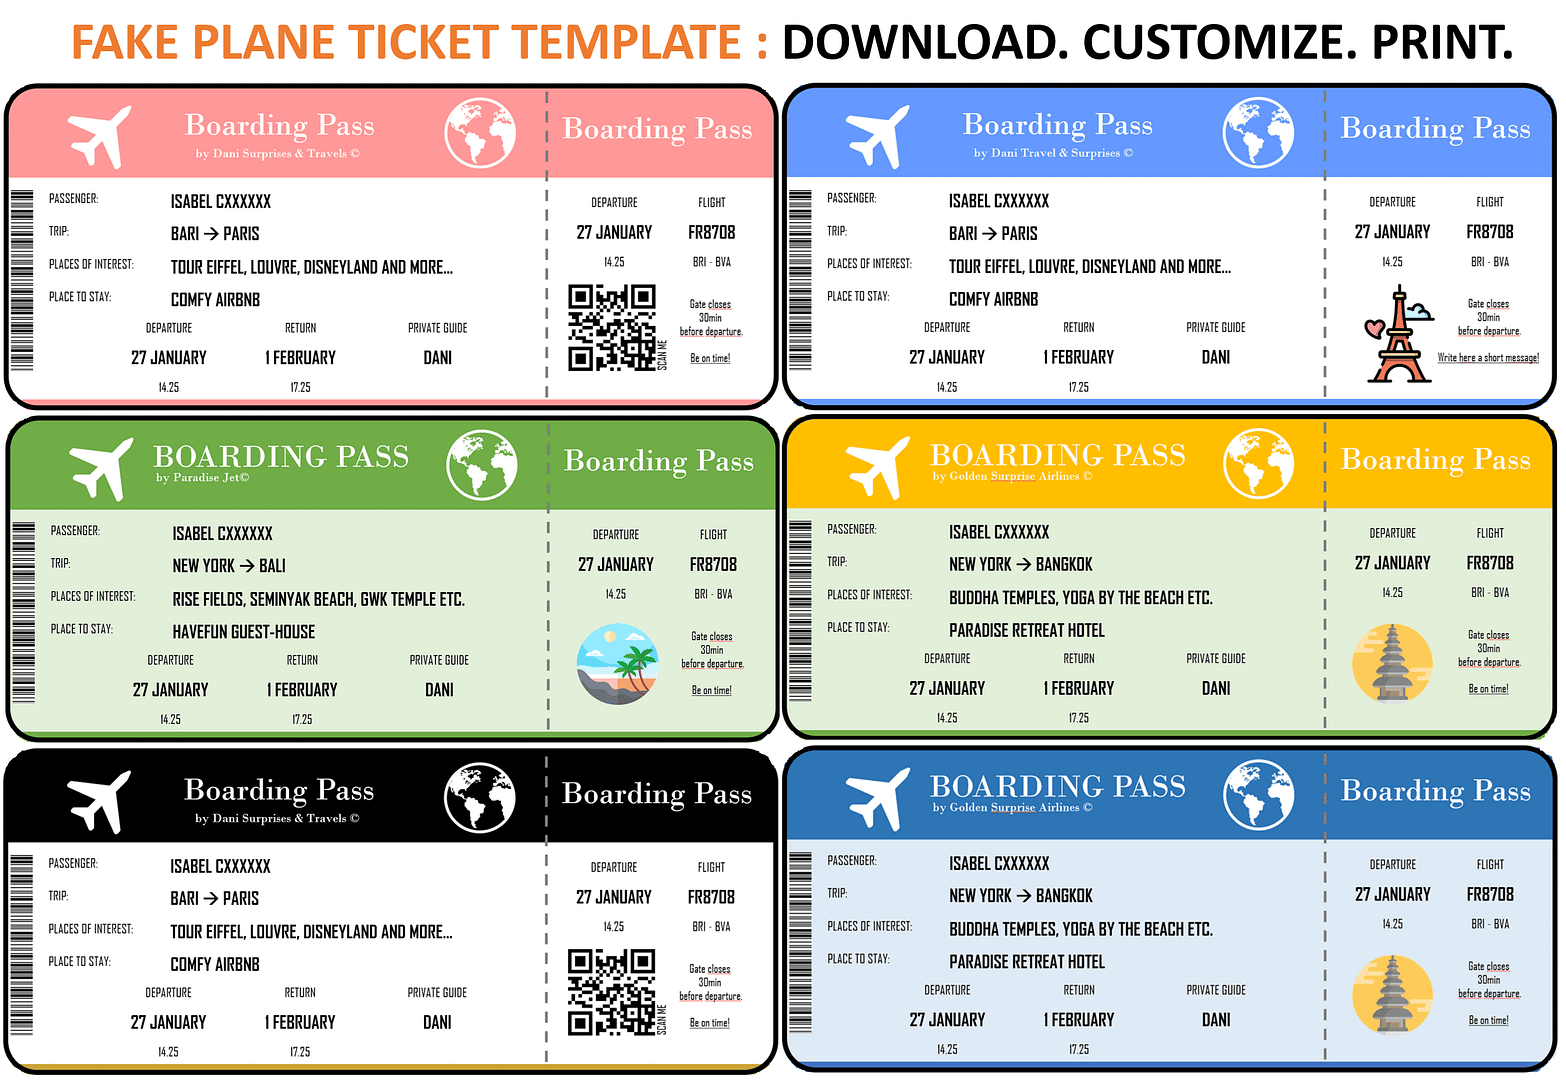 FAKE PLANE TICKET - FAKE AIRLINE TICKET TEMPLATE FREE DOWNLOAD